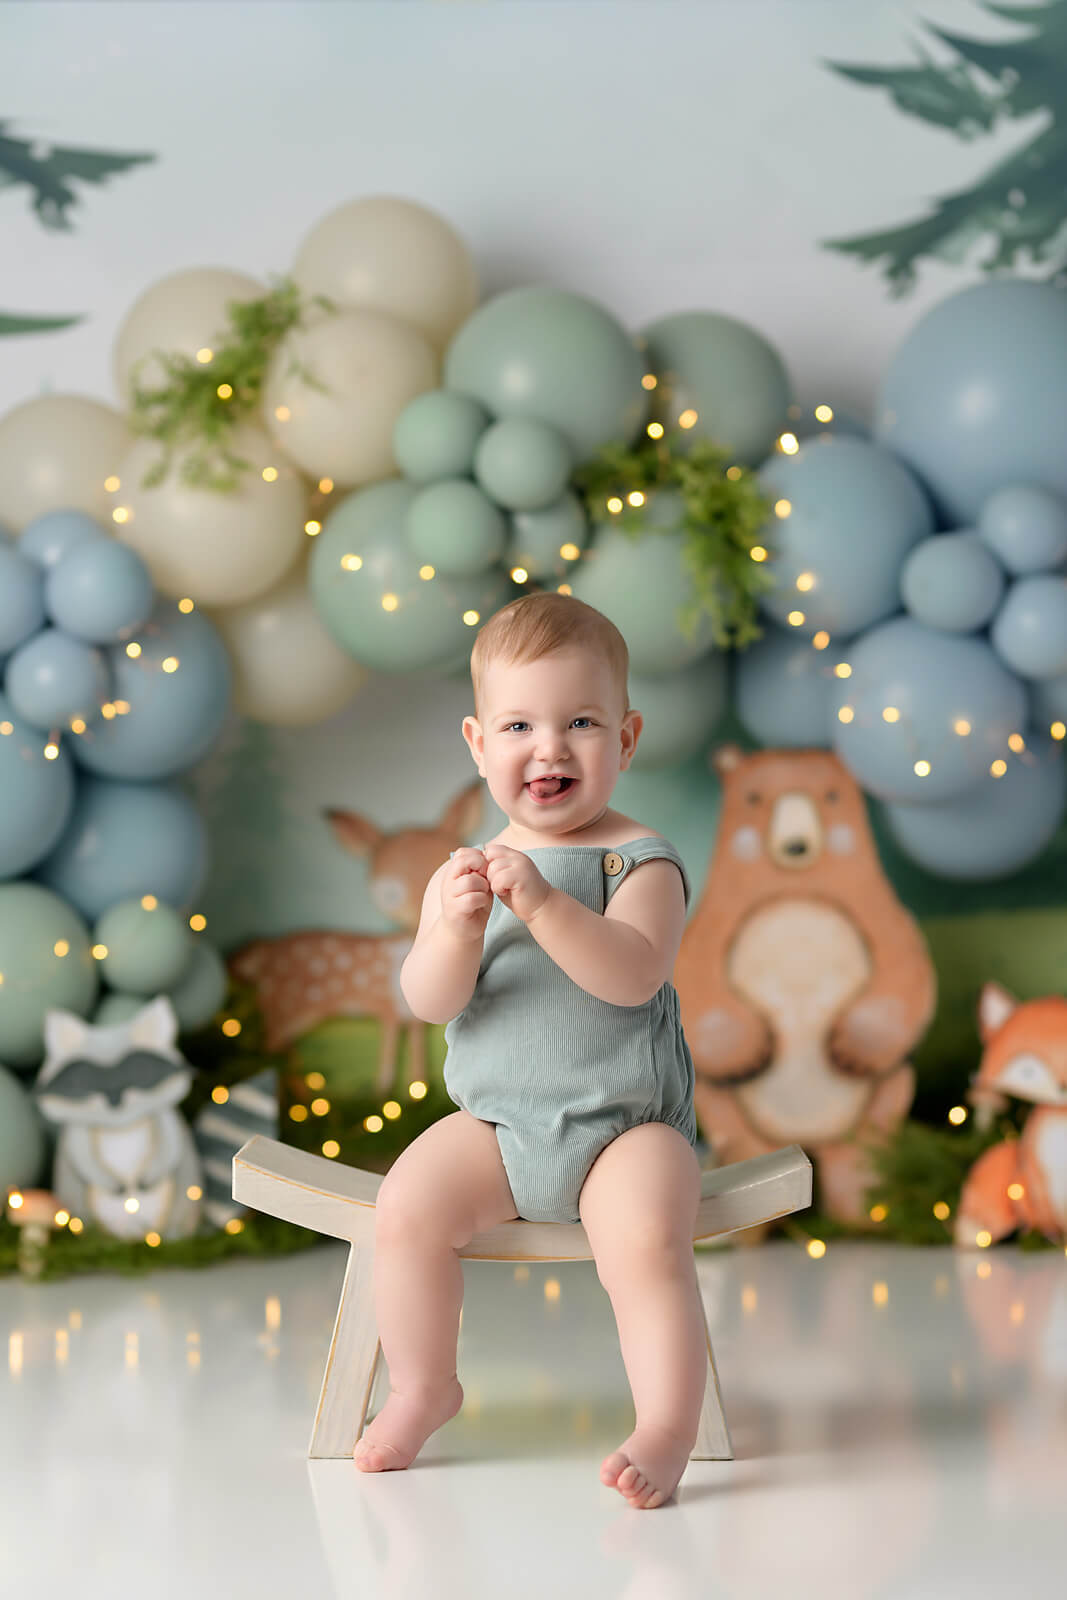 Baby boy in blue romper smiling and sitting on a curved bench. Background is blue and green balloons on with forest animals